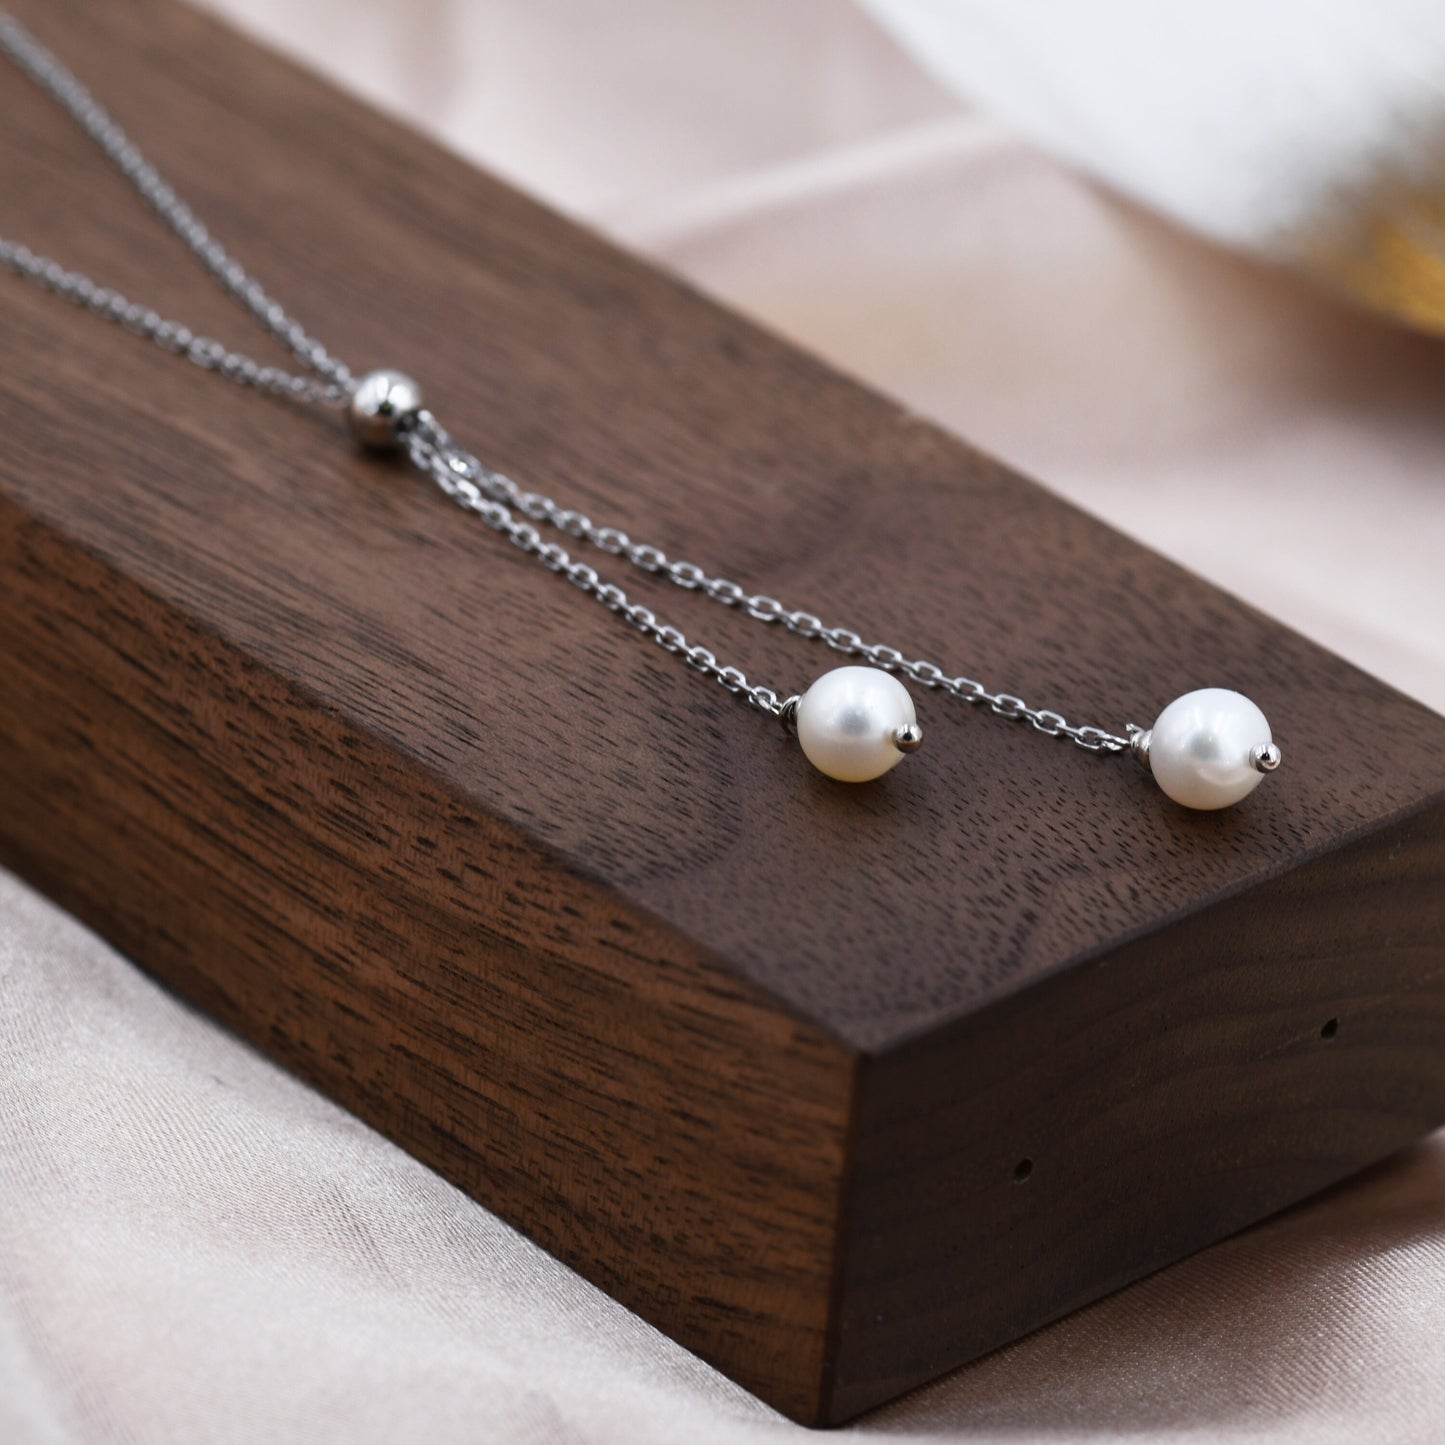 Genuine Pearl Lariat Necklace in Sterling Silver, Silver or Gold , Y Shape, Slider Necklace, Genuine Freshwater Pearls, Pearl Necklace